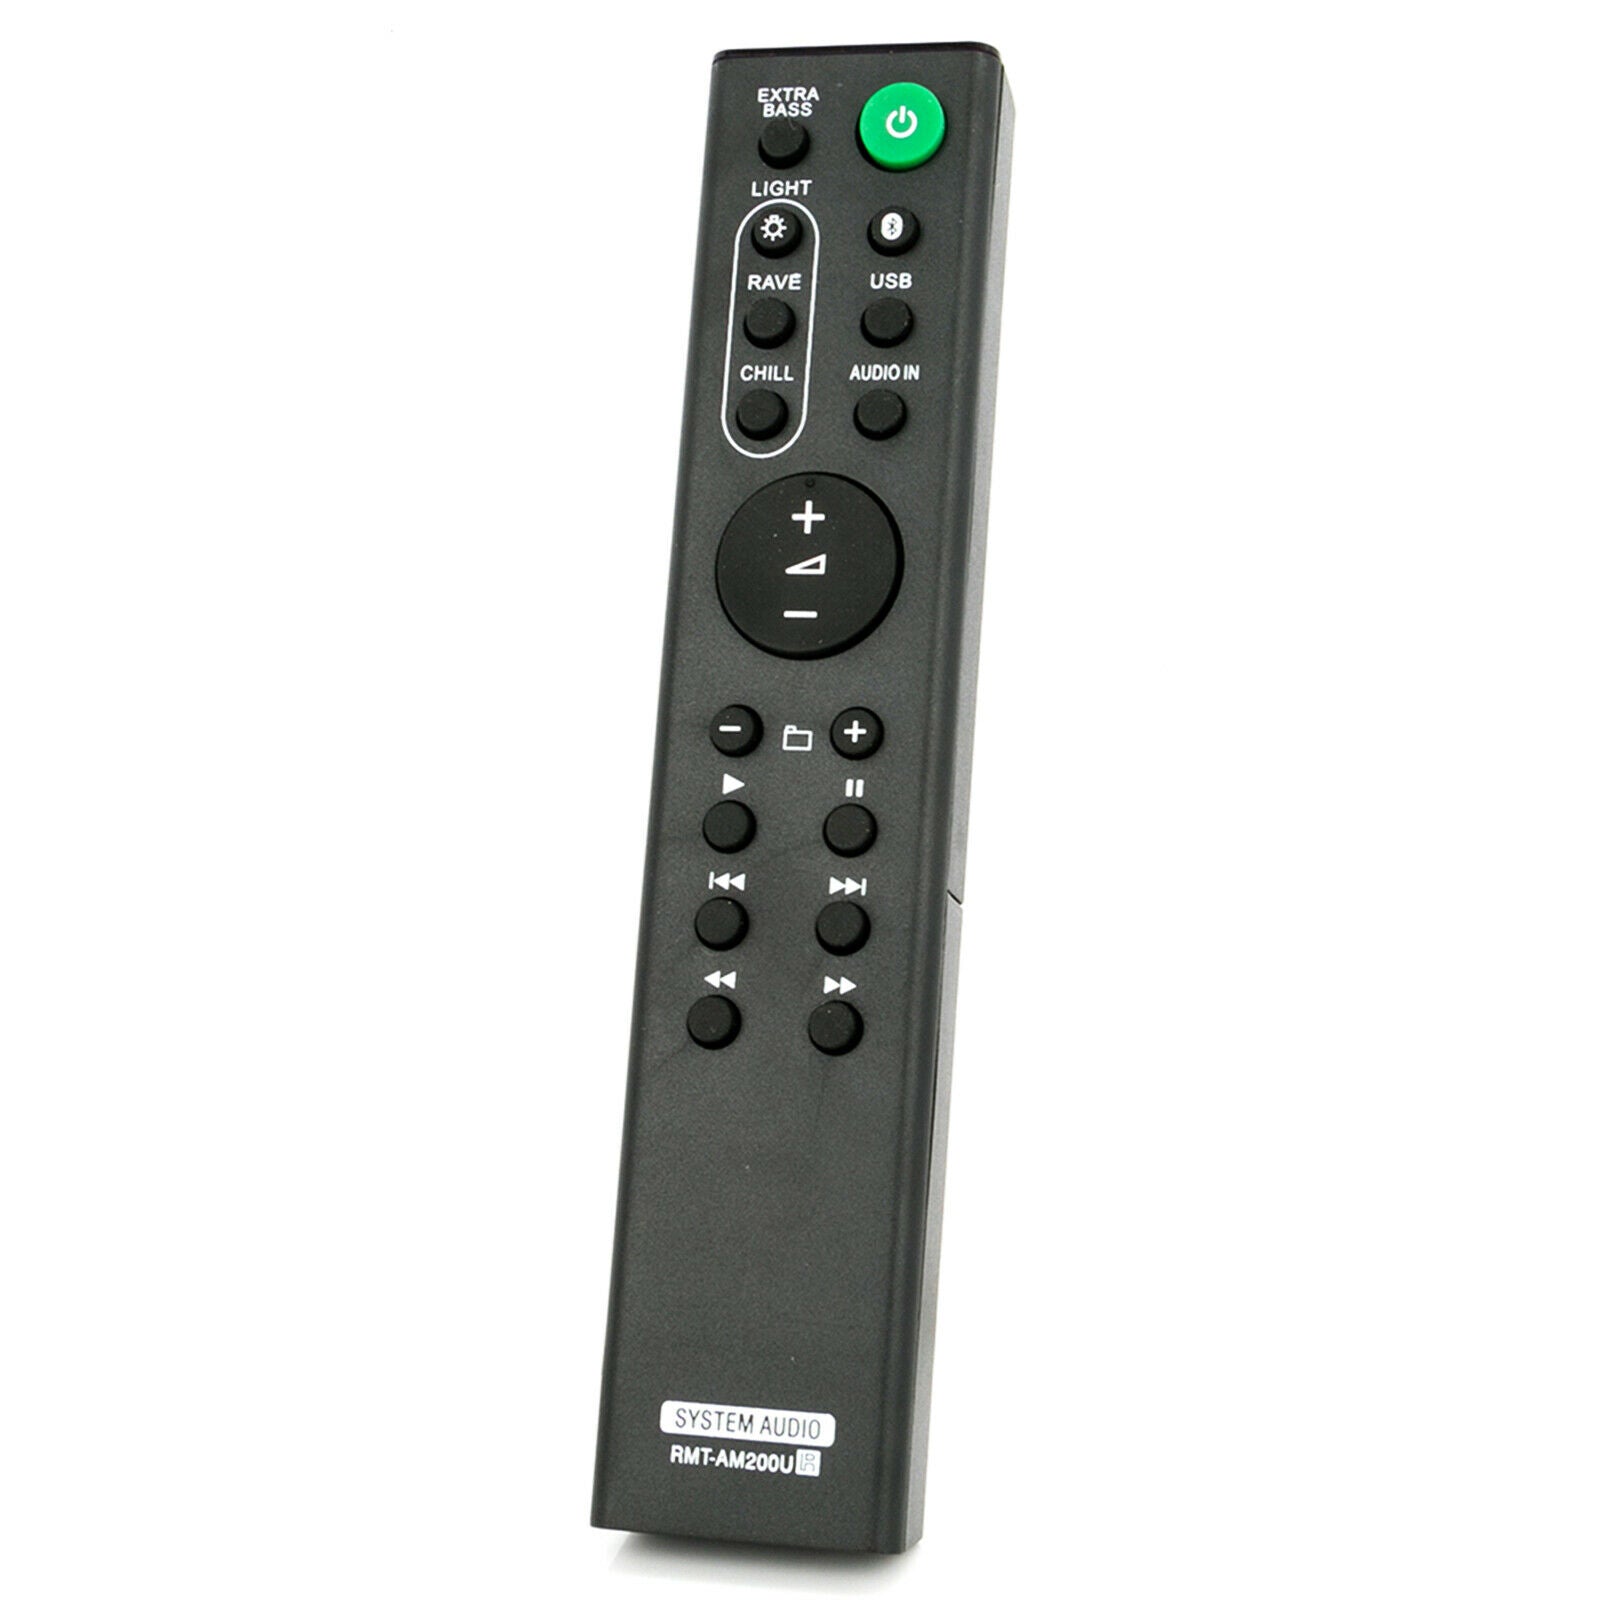 RMT-AM200U Replacement Remote Control for Sony Home Audio AV System GTK-XB7 GTKXB7